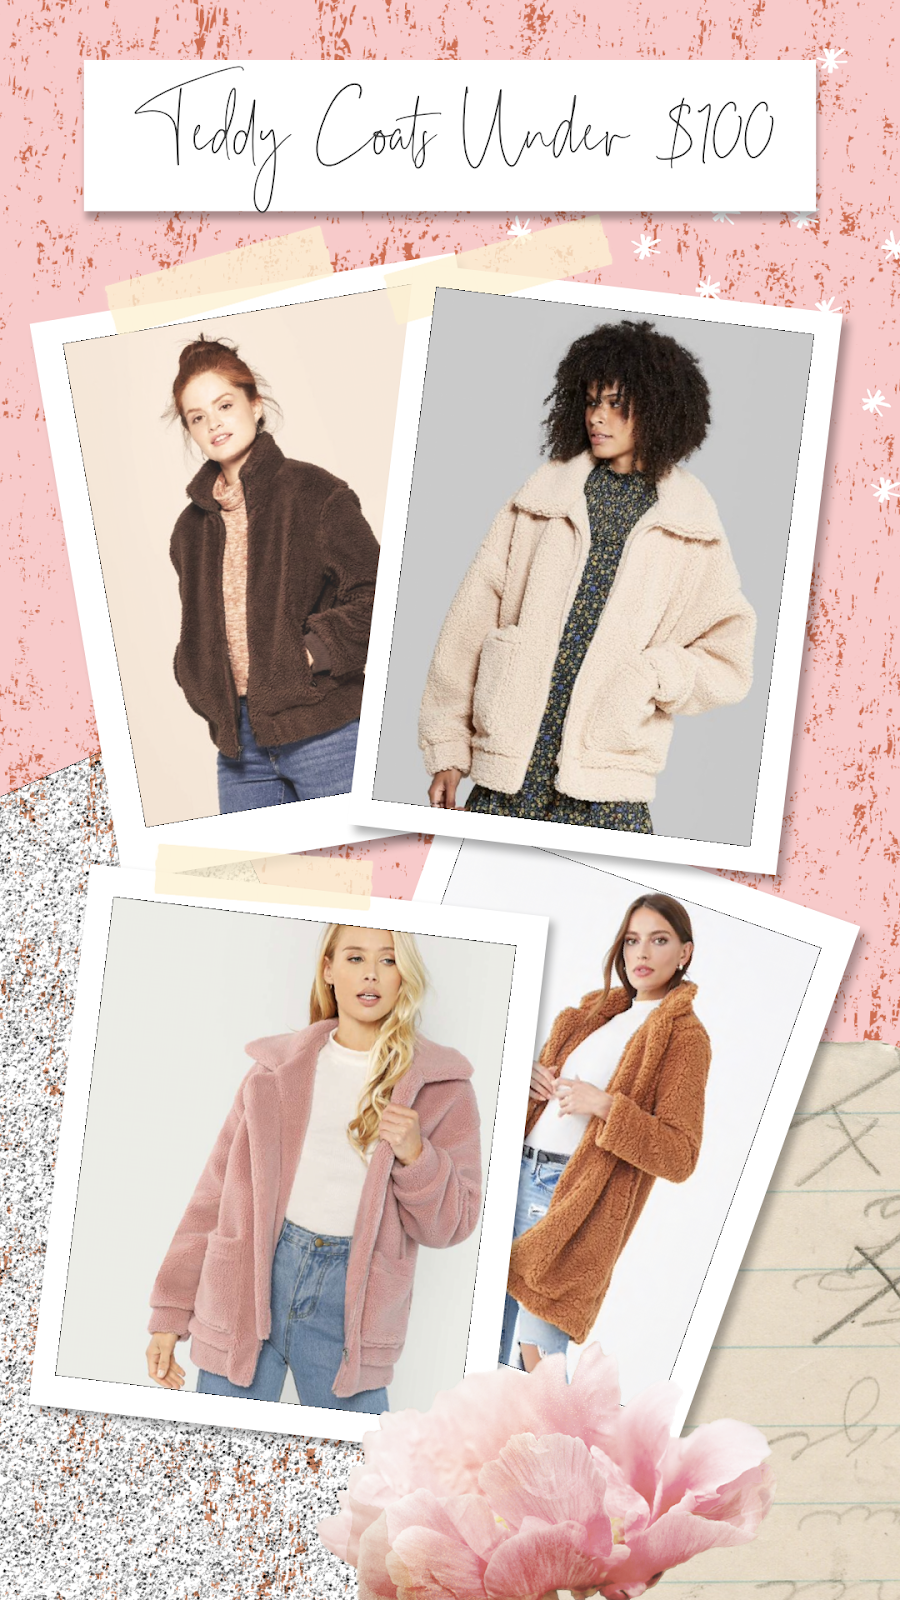 AFFORDABLE TEDDY COATS UNDER $100! Affordable by Amanda, Tampa Blogger.Teddy Coat, Teddy Coat Under $35, Brown Teddy Coat, Winter Coat, Black Teddy Coat, WIW, OOTD, #TeddyCoat, #BrownTeddyCoat, #BlackTeddyCoat, #WinterCoat,